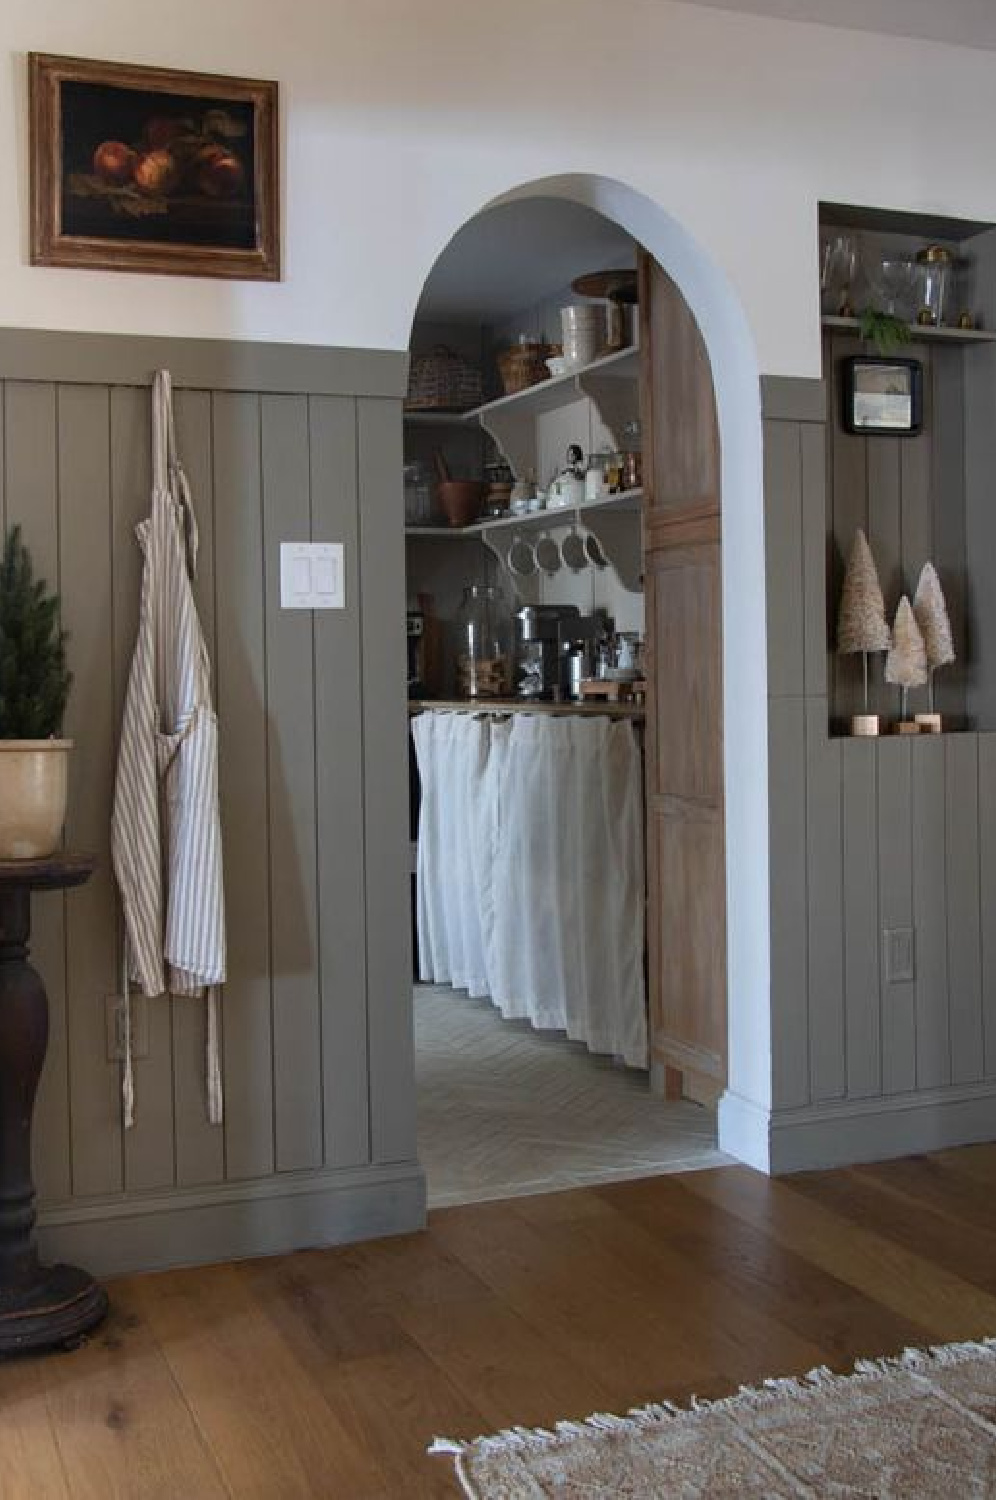 Cozy kitchen pantry with archway and English country style - via Nikkisplate. #englishcountry #cozypantry #europeancountry